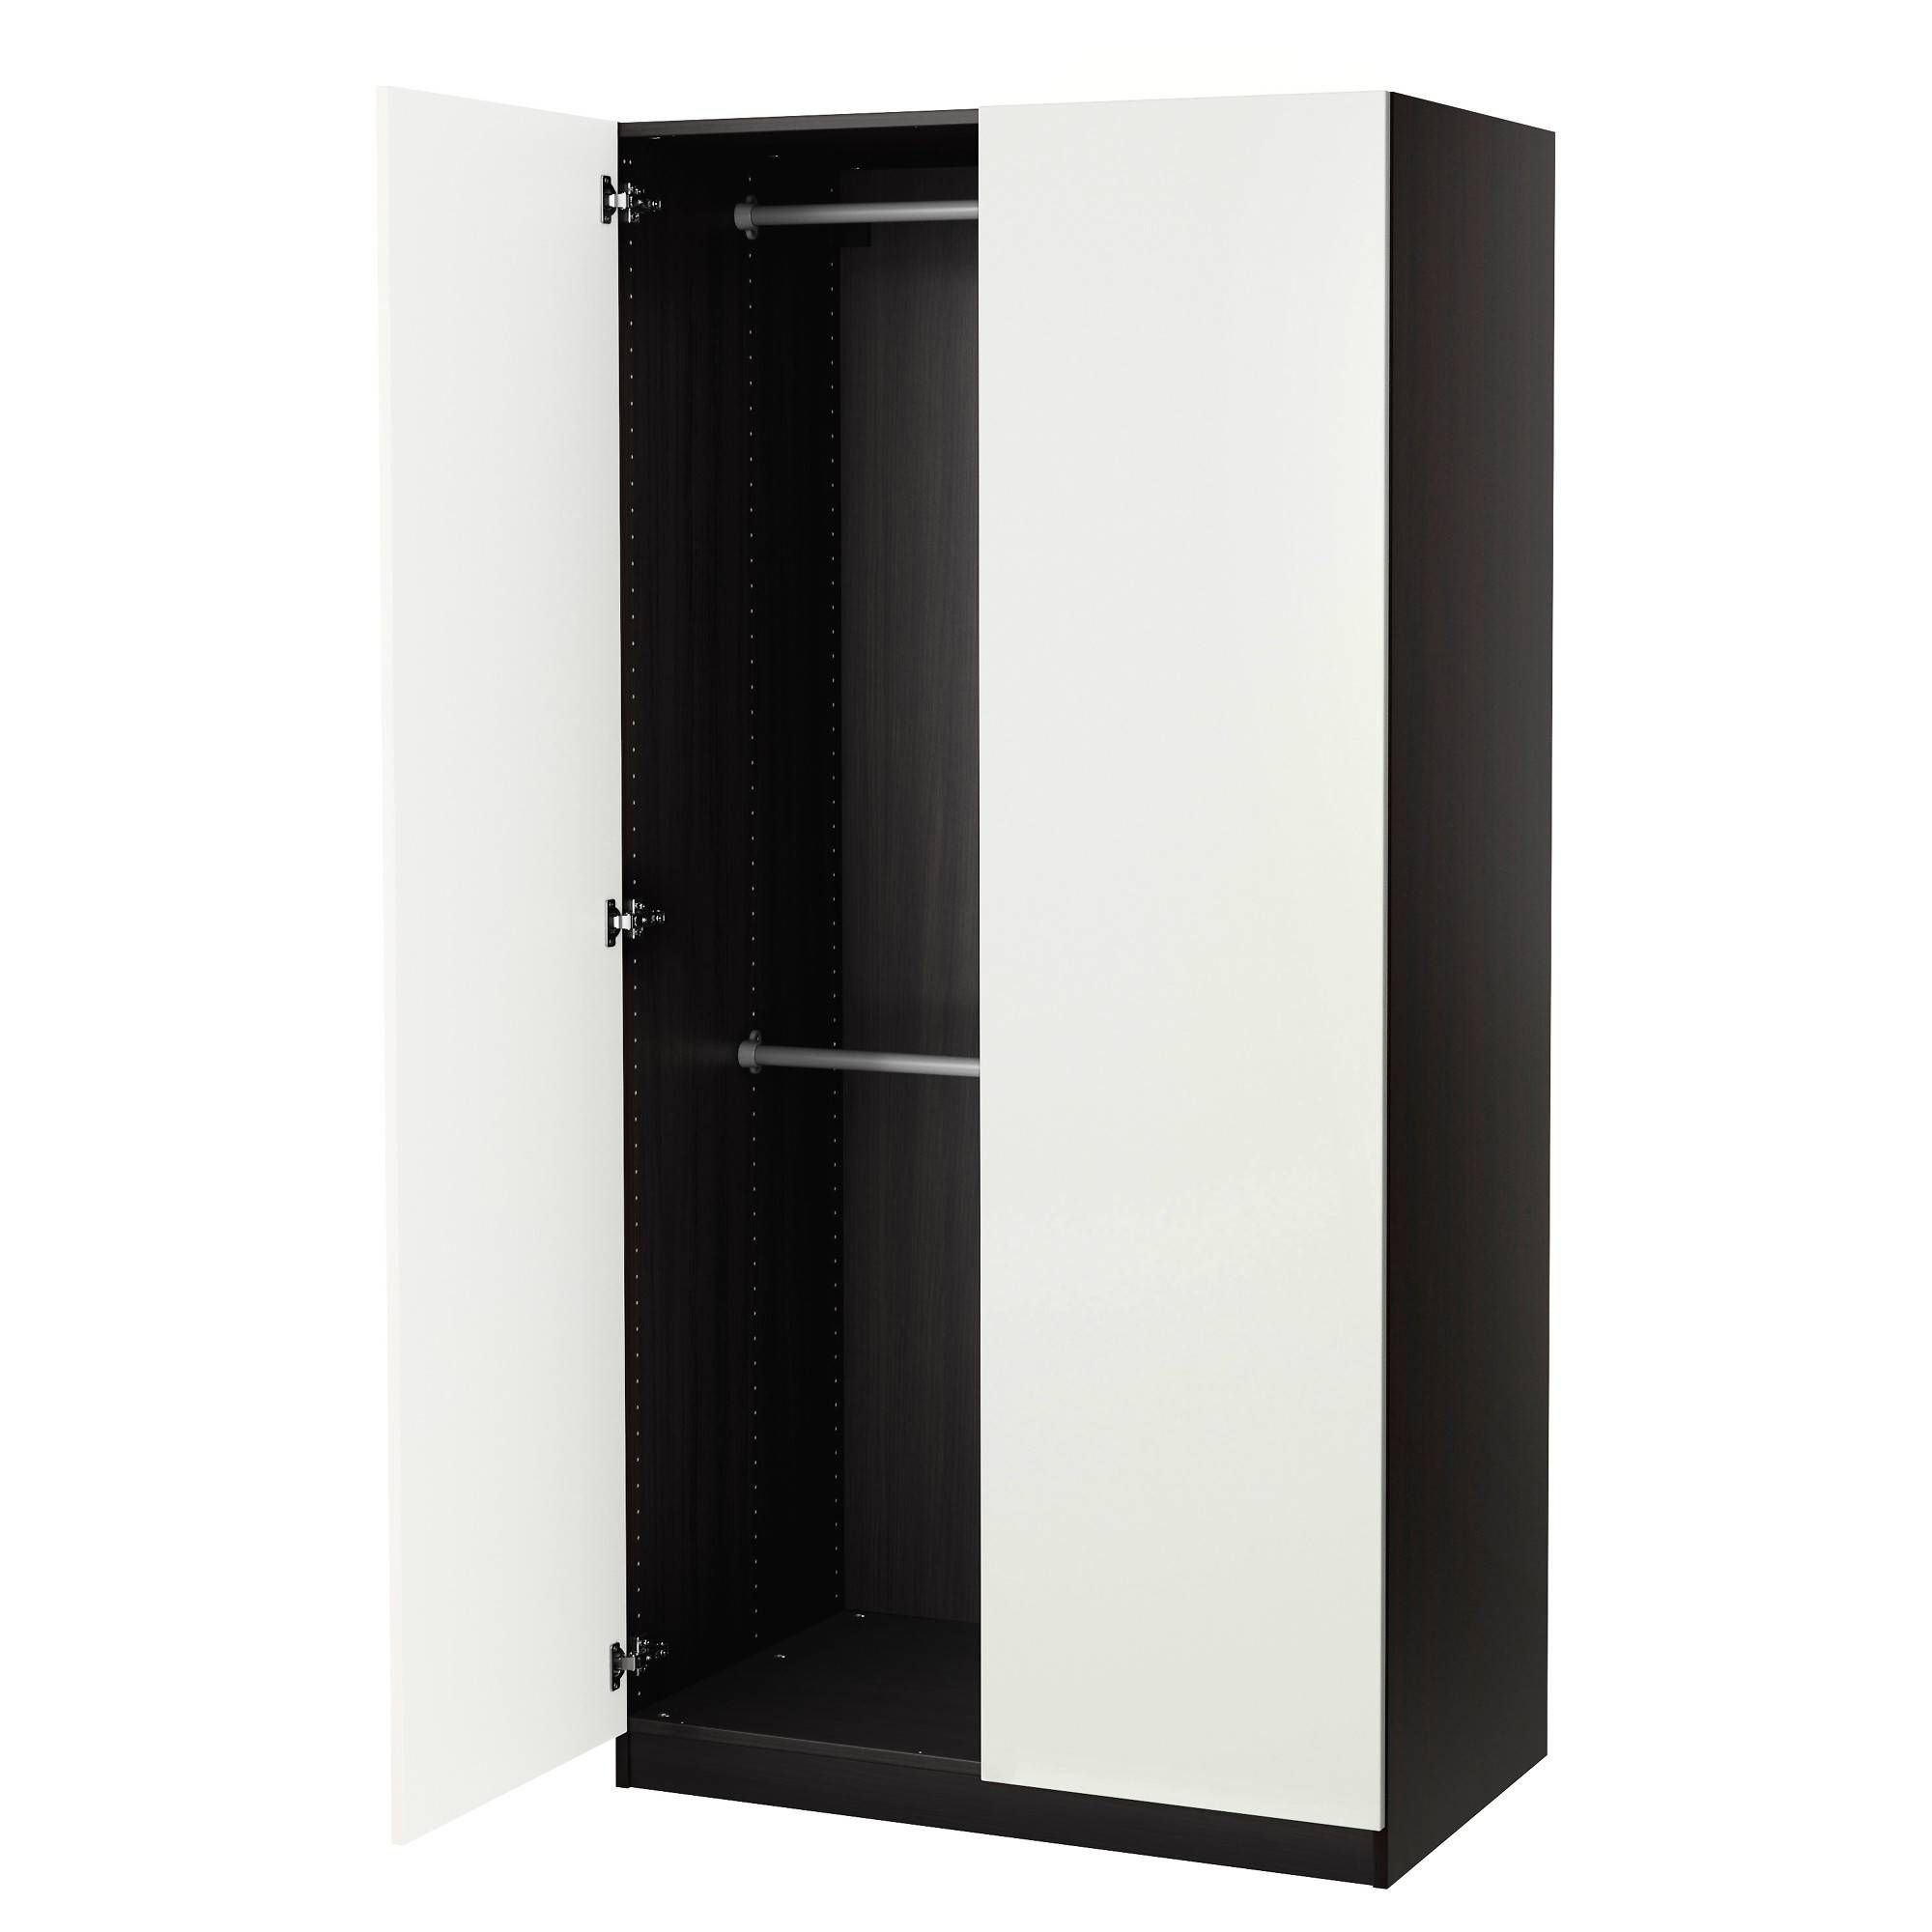 Wardrobes, Armoires & Closets – Ikea Throughout Black Wardrobes With Drawers (View 7 of 15)